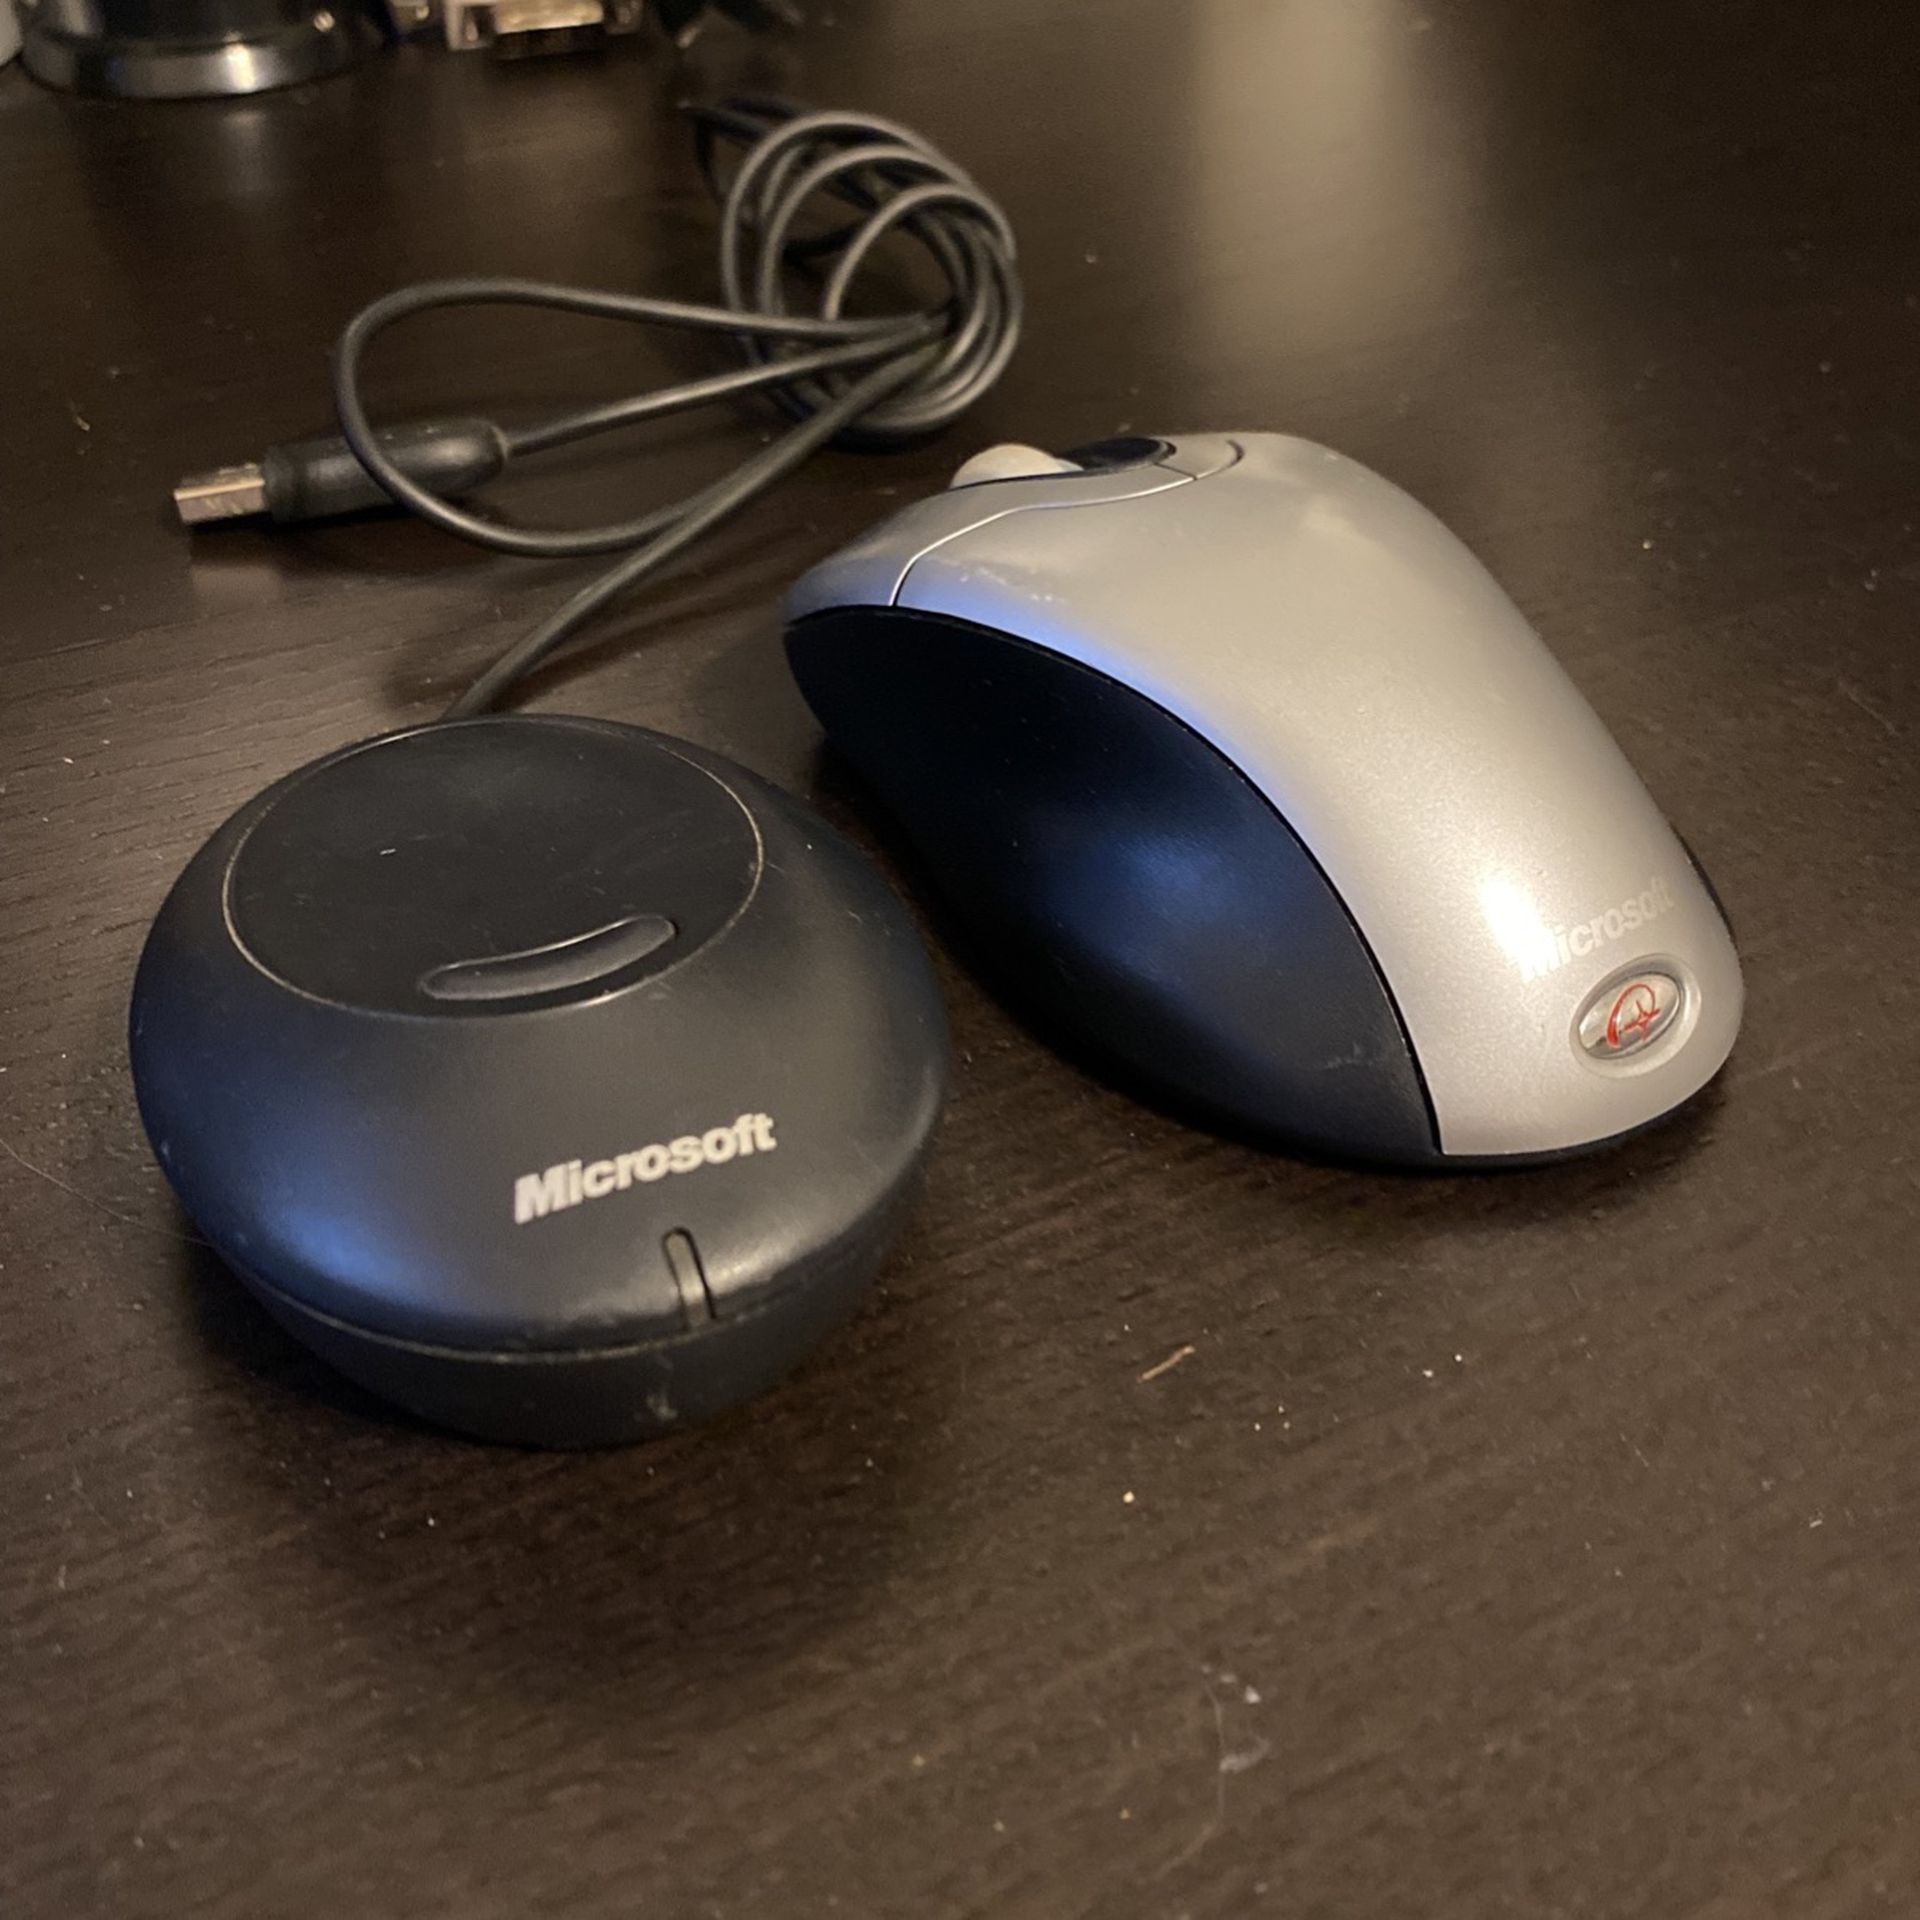 Microsoft Wireless Optical Mouse 2.0 and Wireless Optical Mouse Receiver